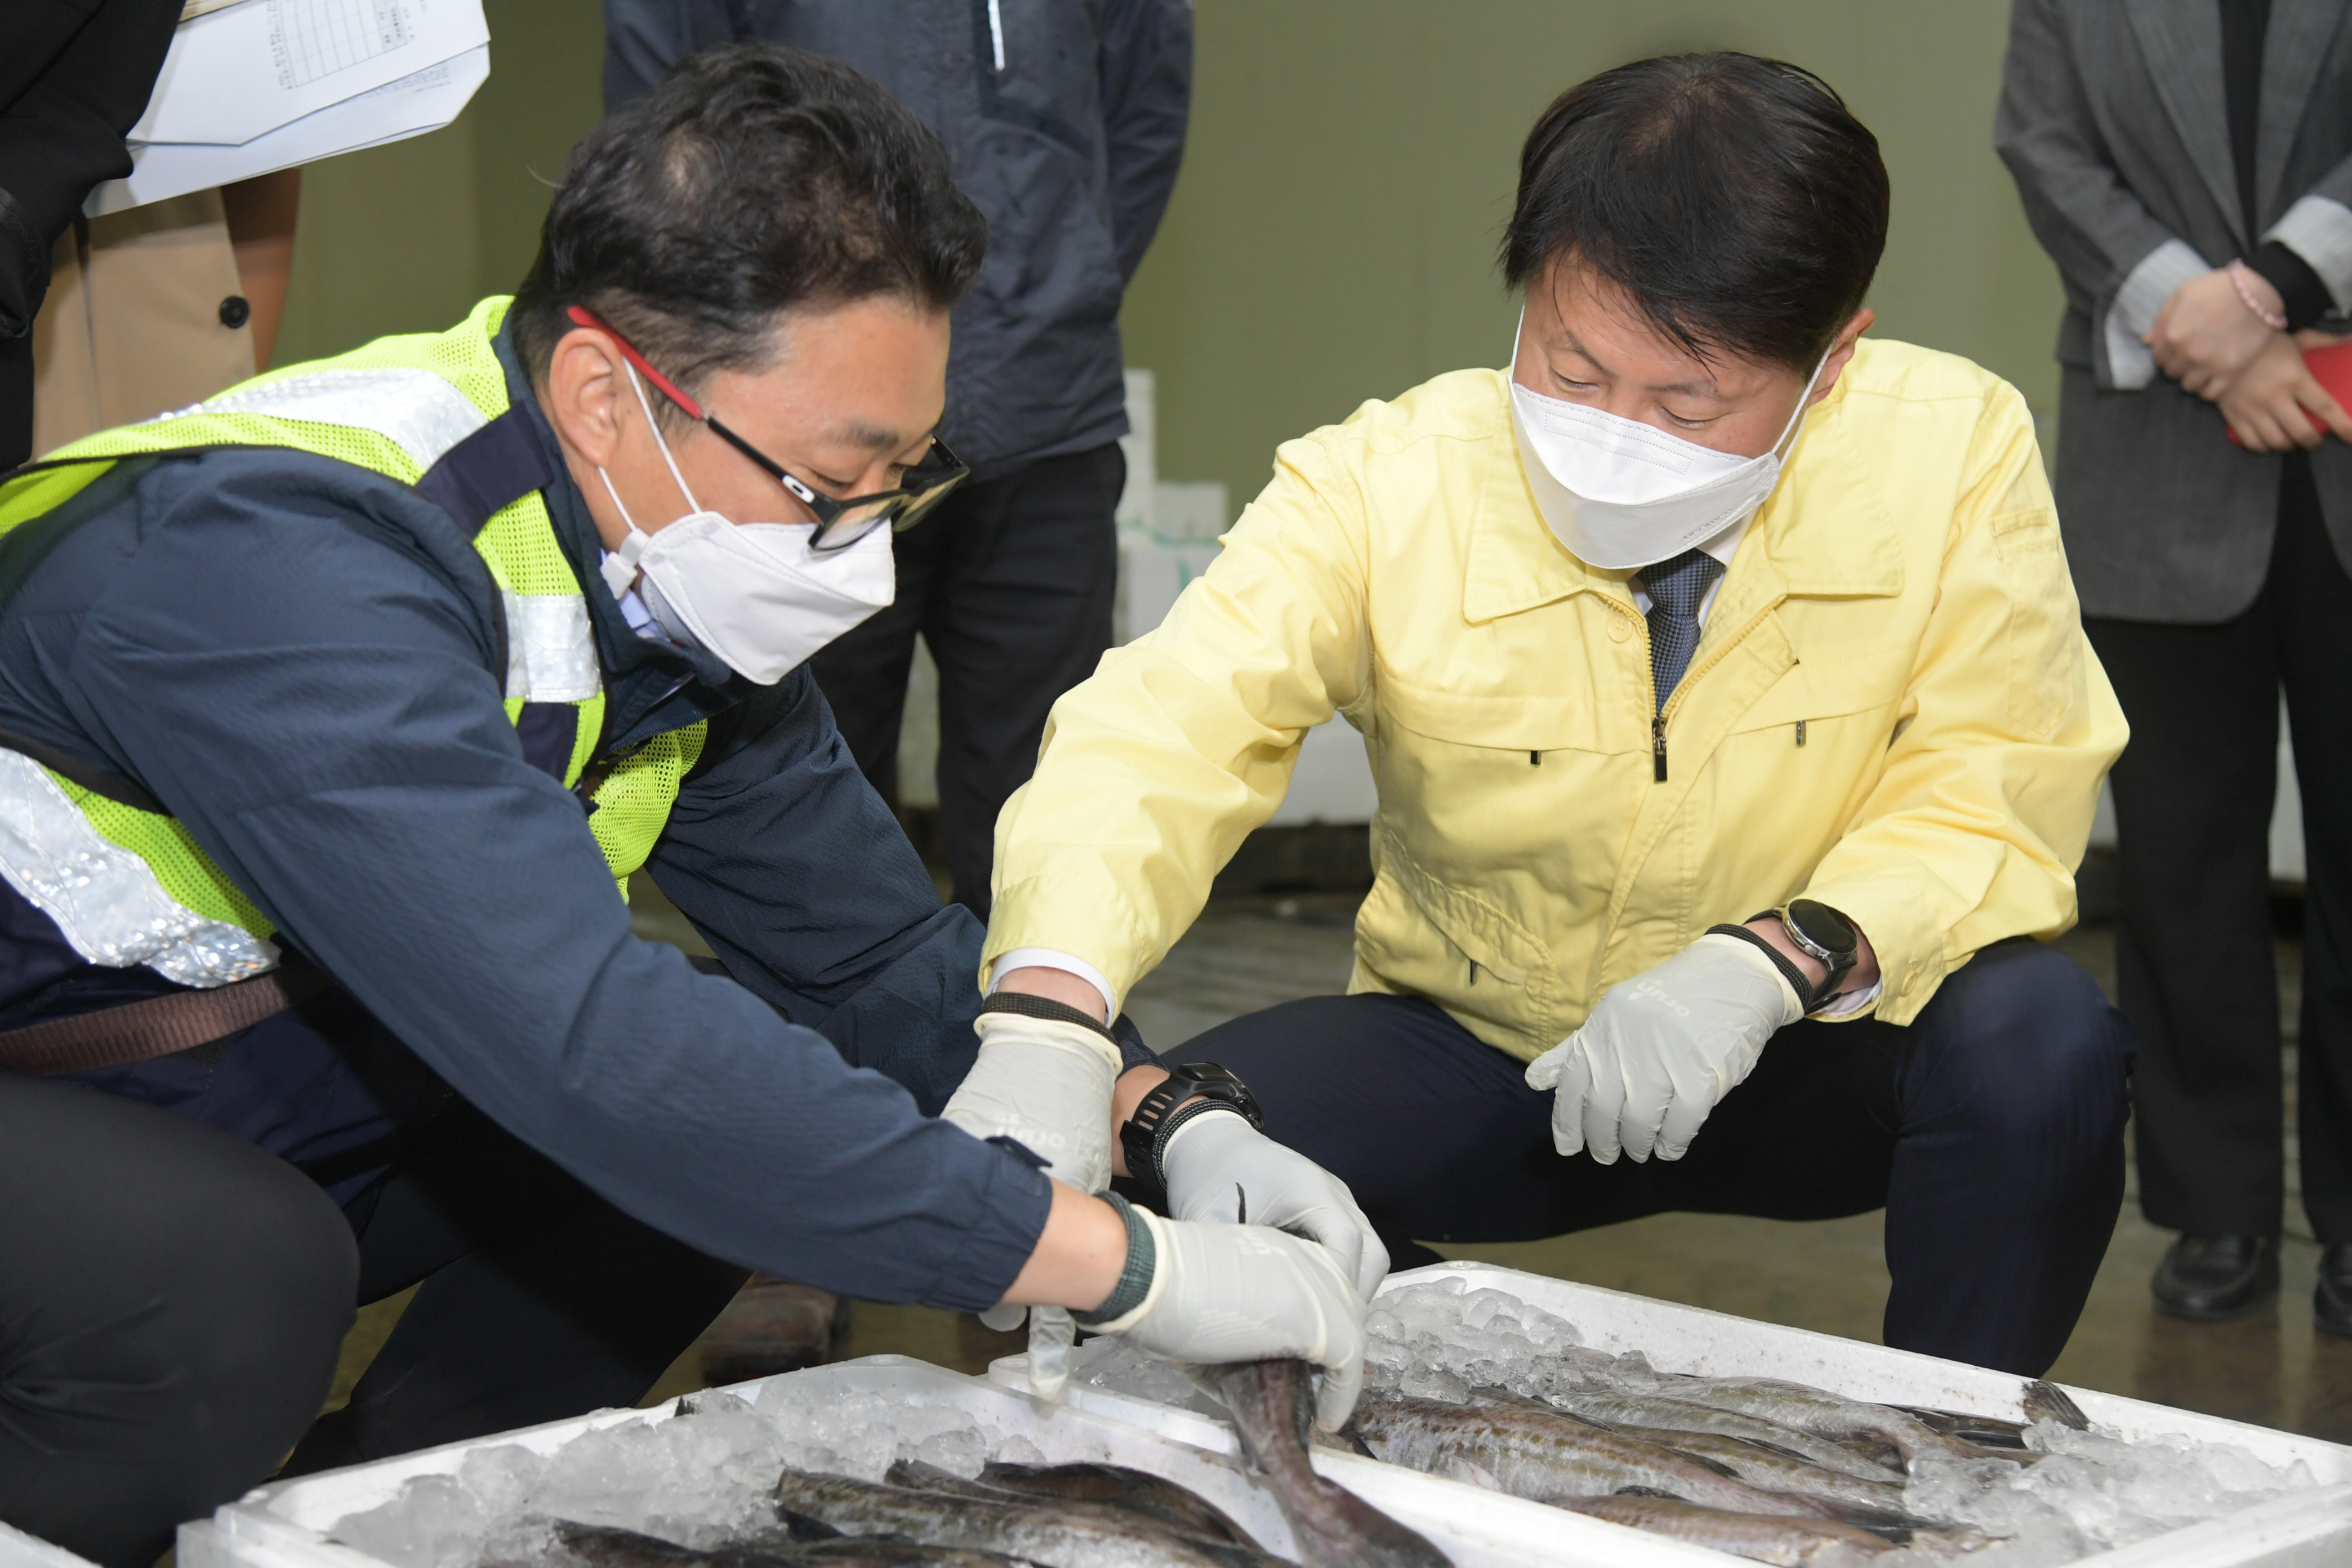 Photo News2 - [April 19, 2021] Minister visits Japanese fishery inspection site